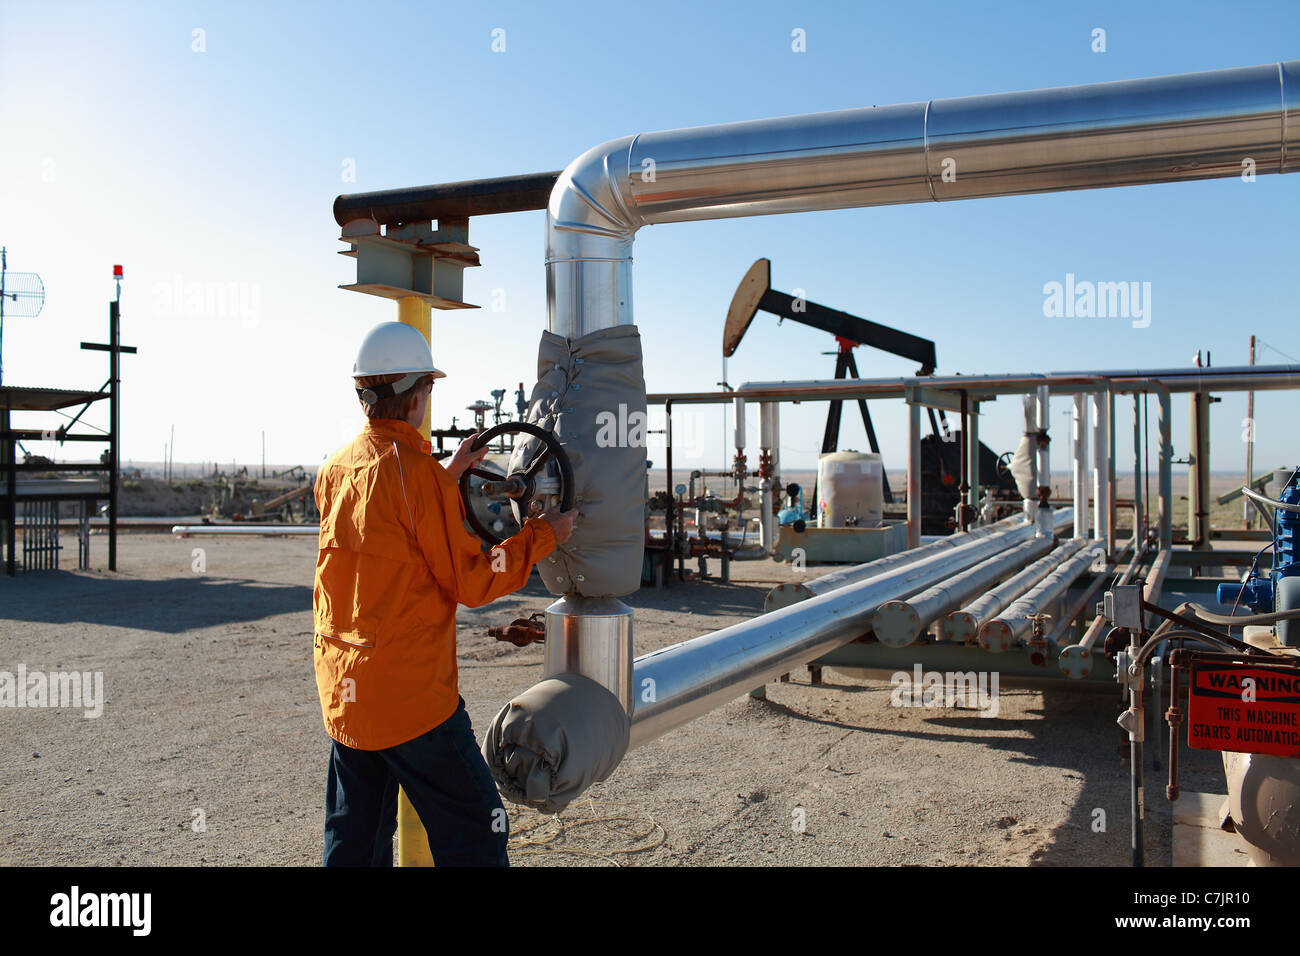 Worker adjusting pipes at oil field Stock Photo